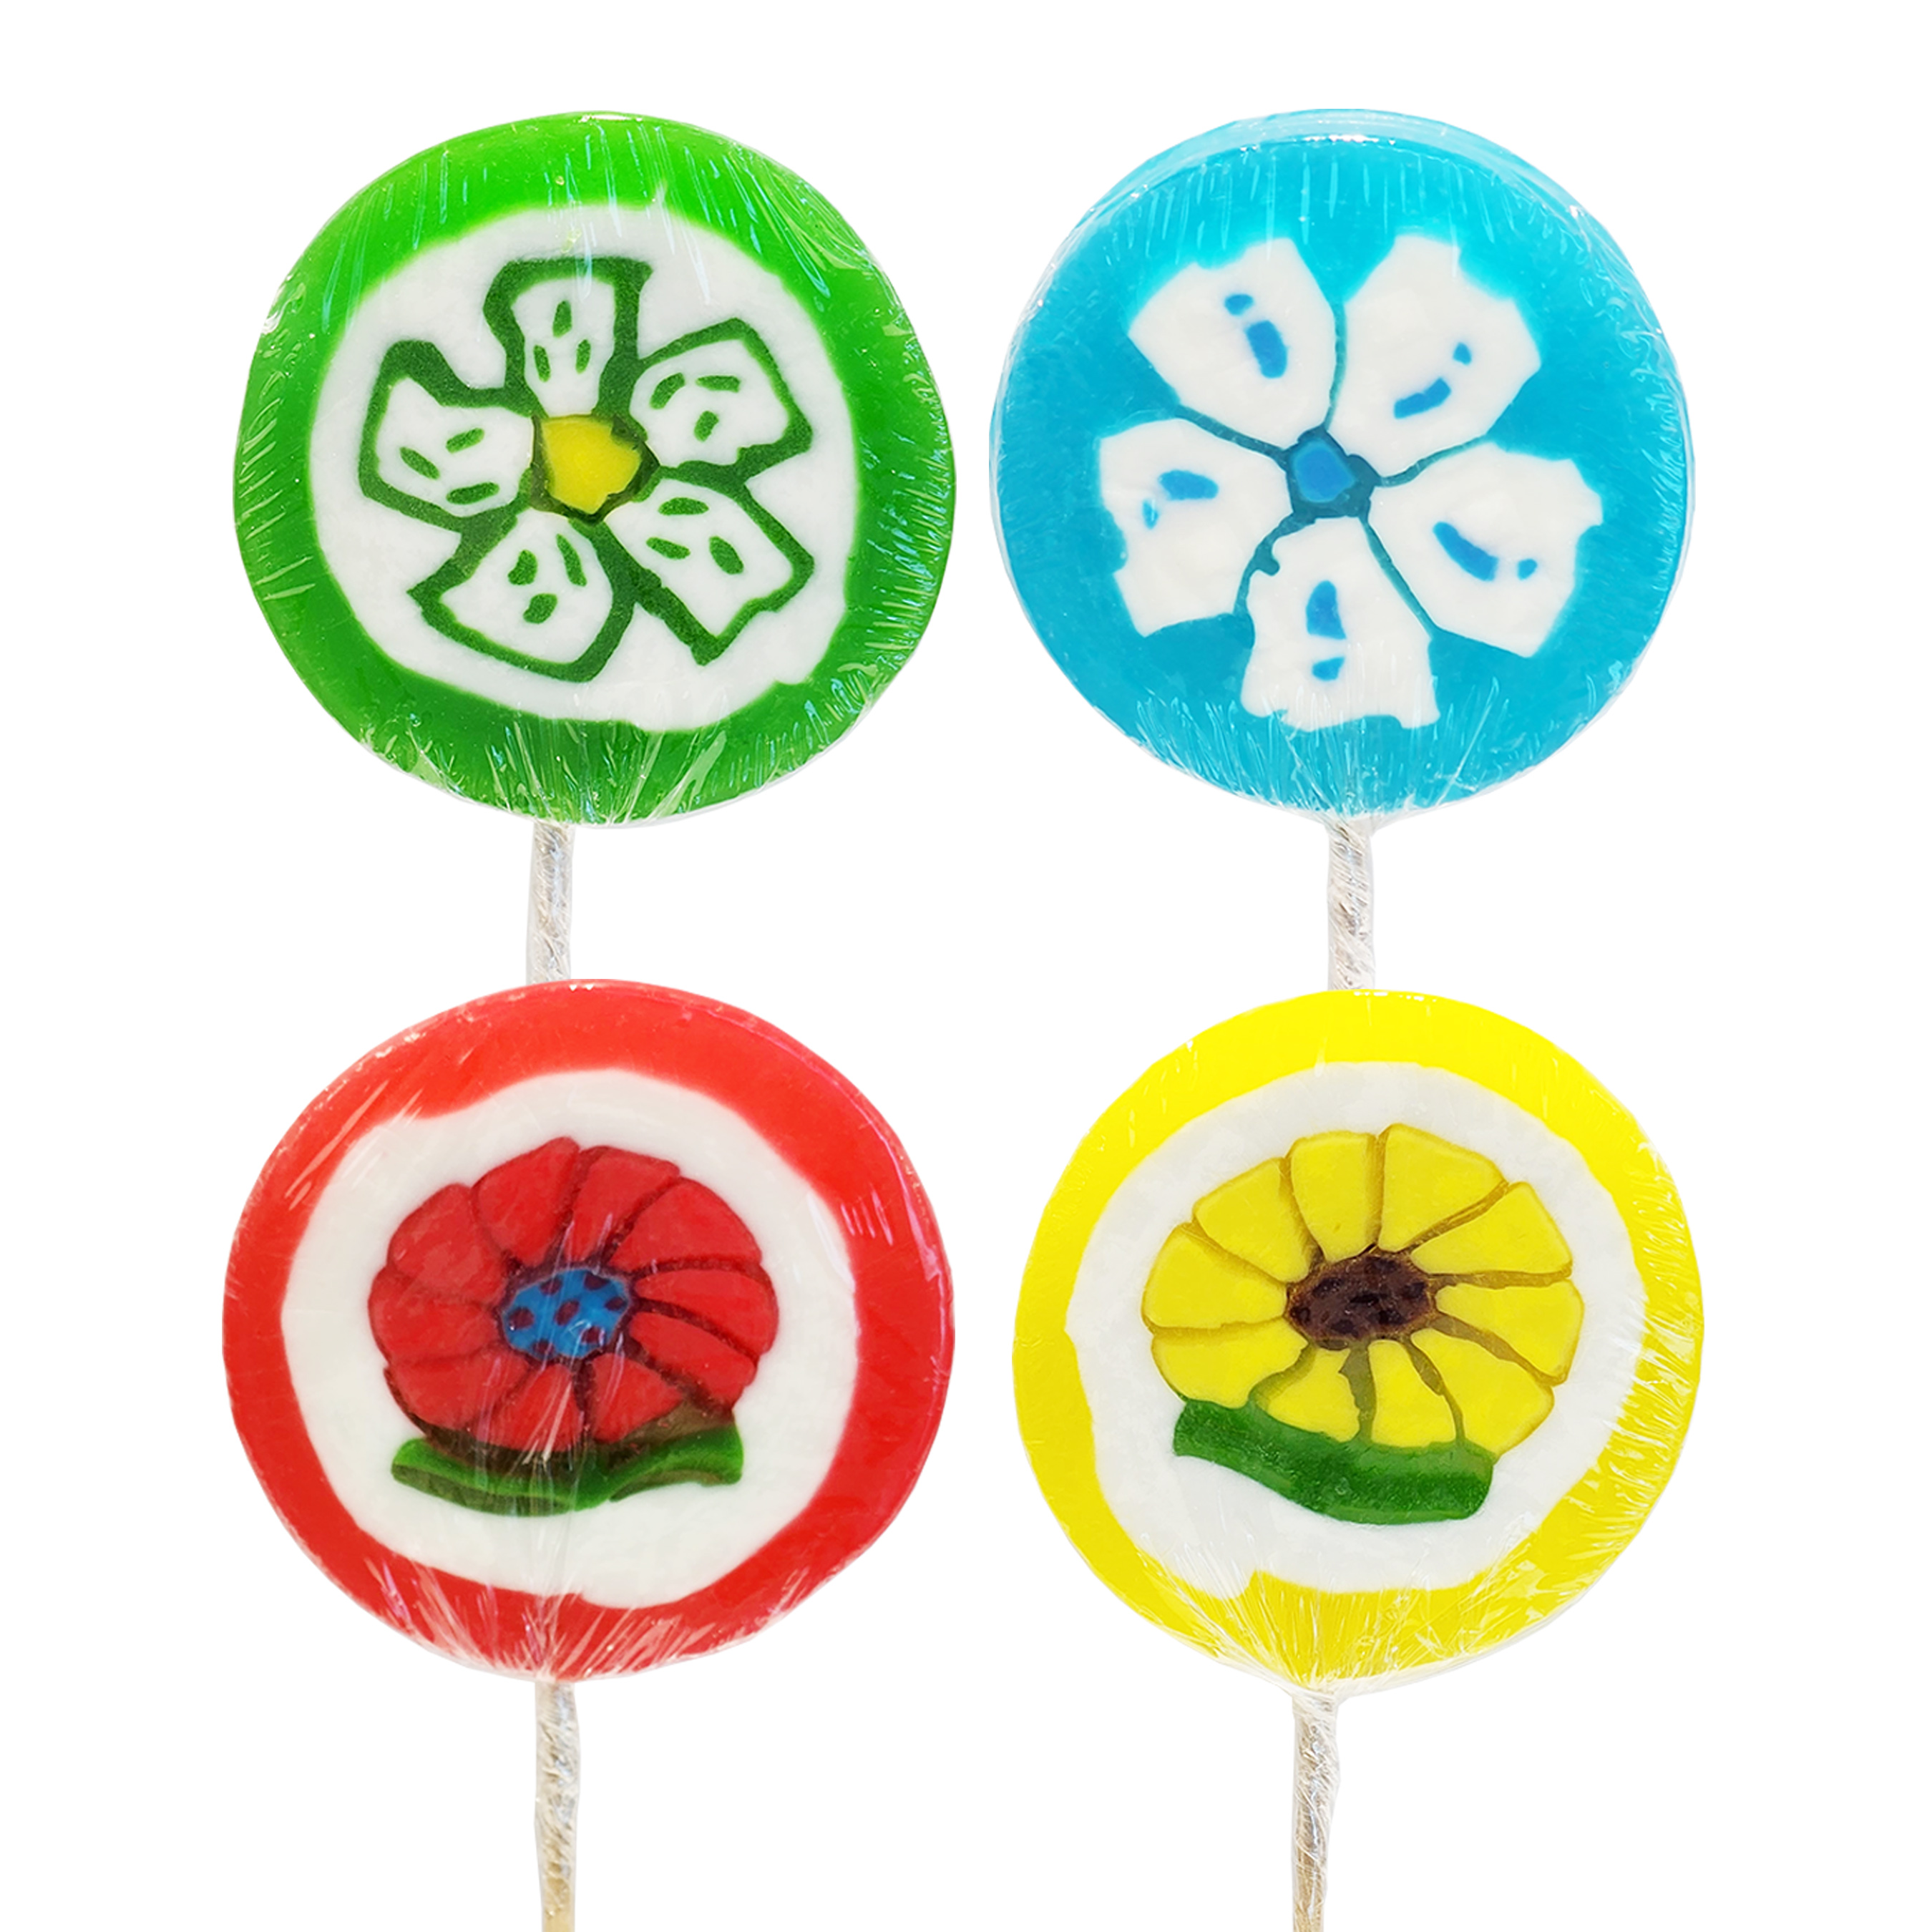 popular product includes our Jumbo flower lollipop with four varying shapes. 90 grams. 20 pieces in a bag